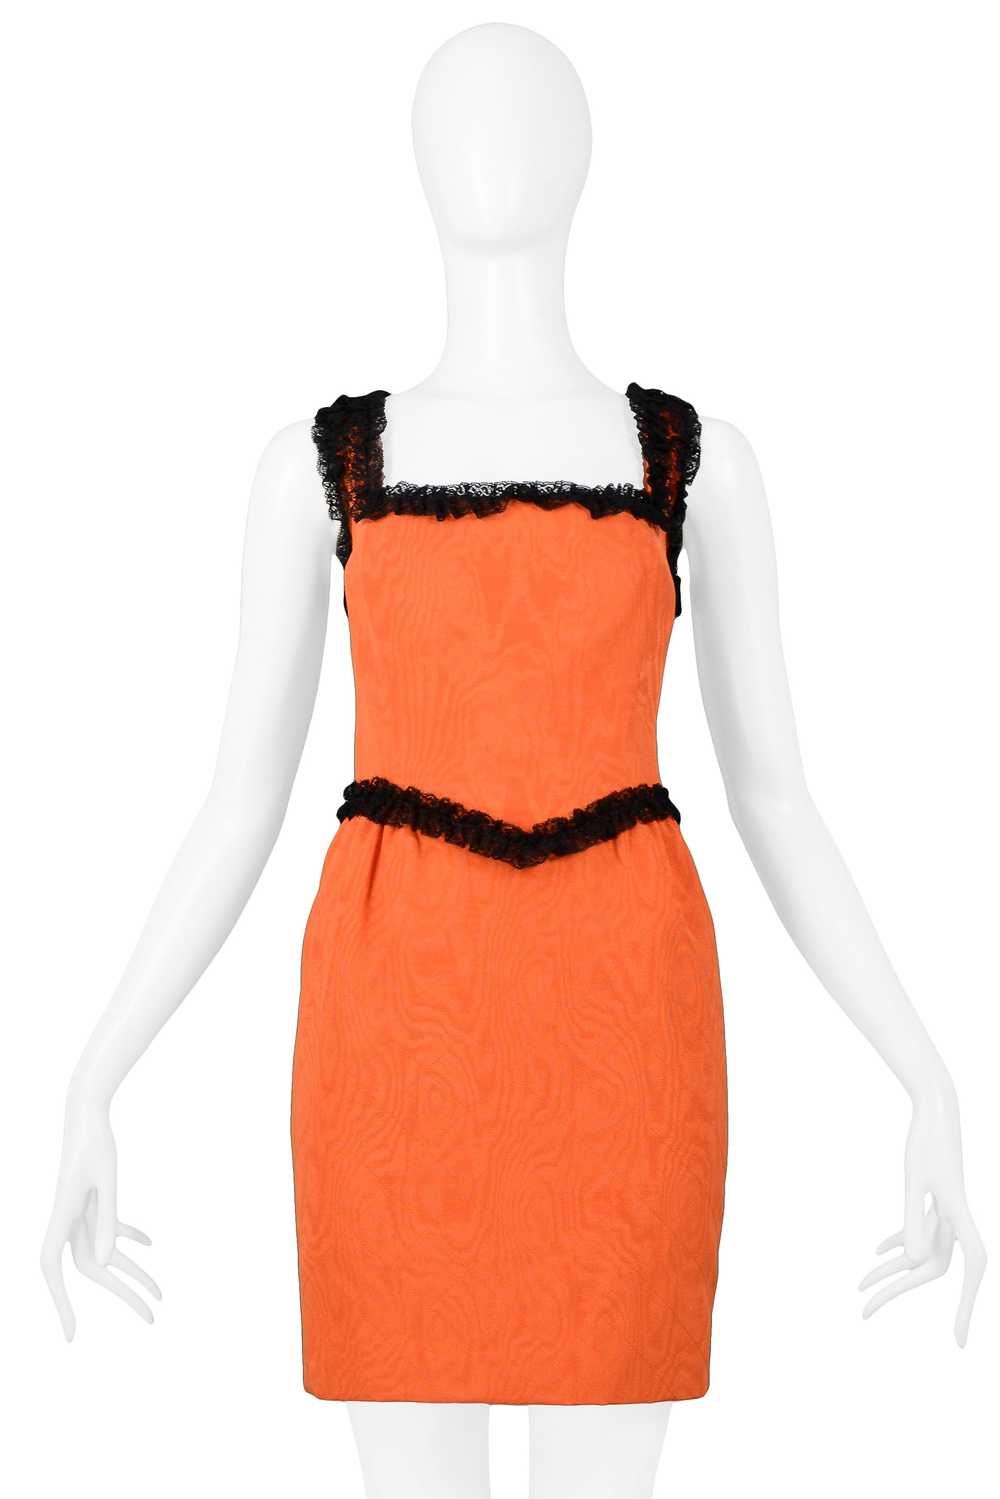 MOSCHINO COUTURE ORANGE QUILTED FAILLE WITH BLACK… - image 3